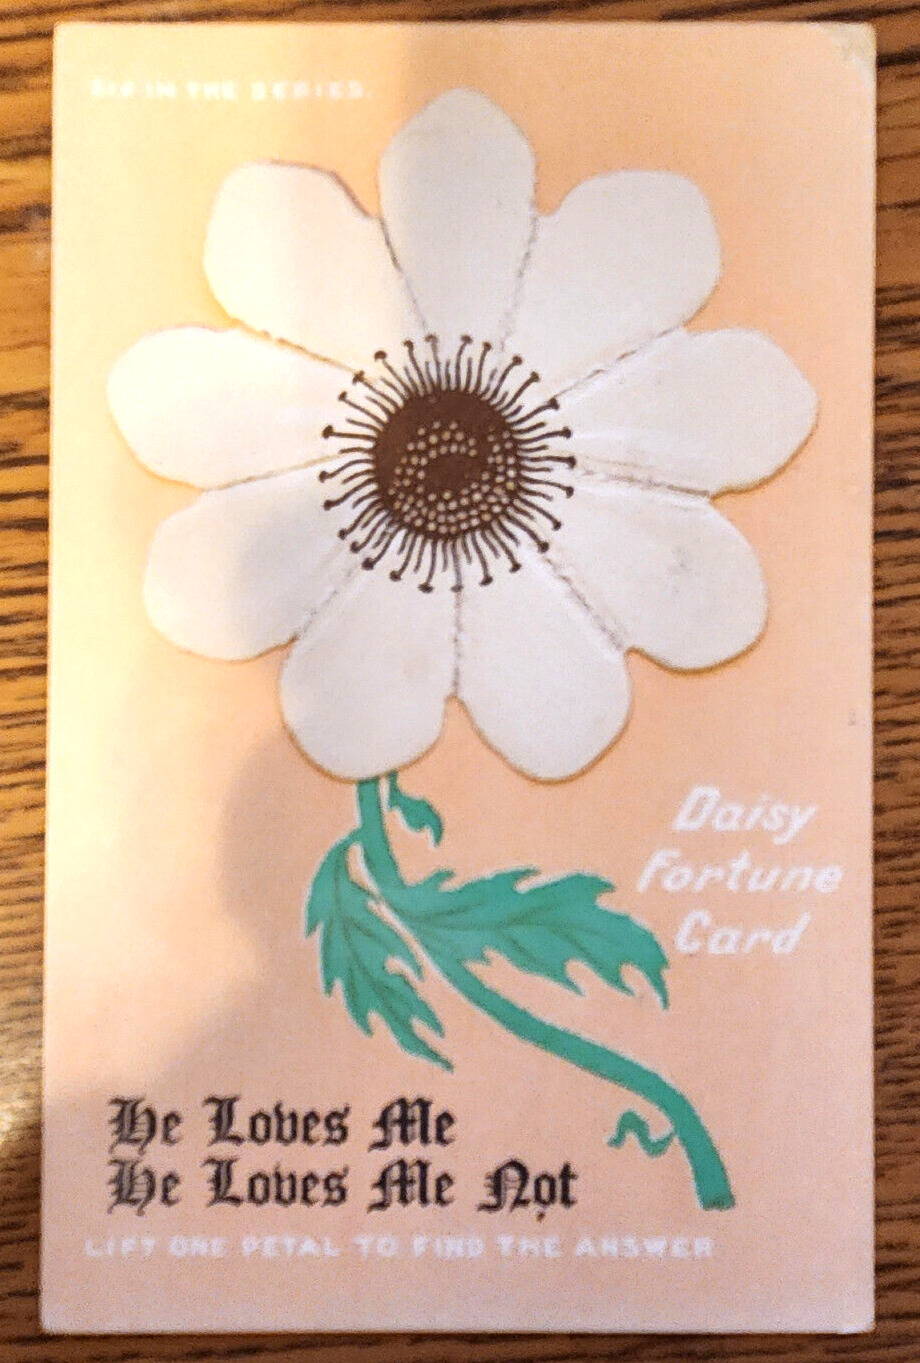 Daisy Fortune Telling Novelty Postcard Lift Petals To Find Loves Answer